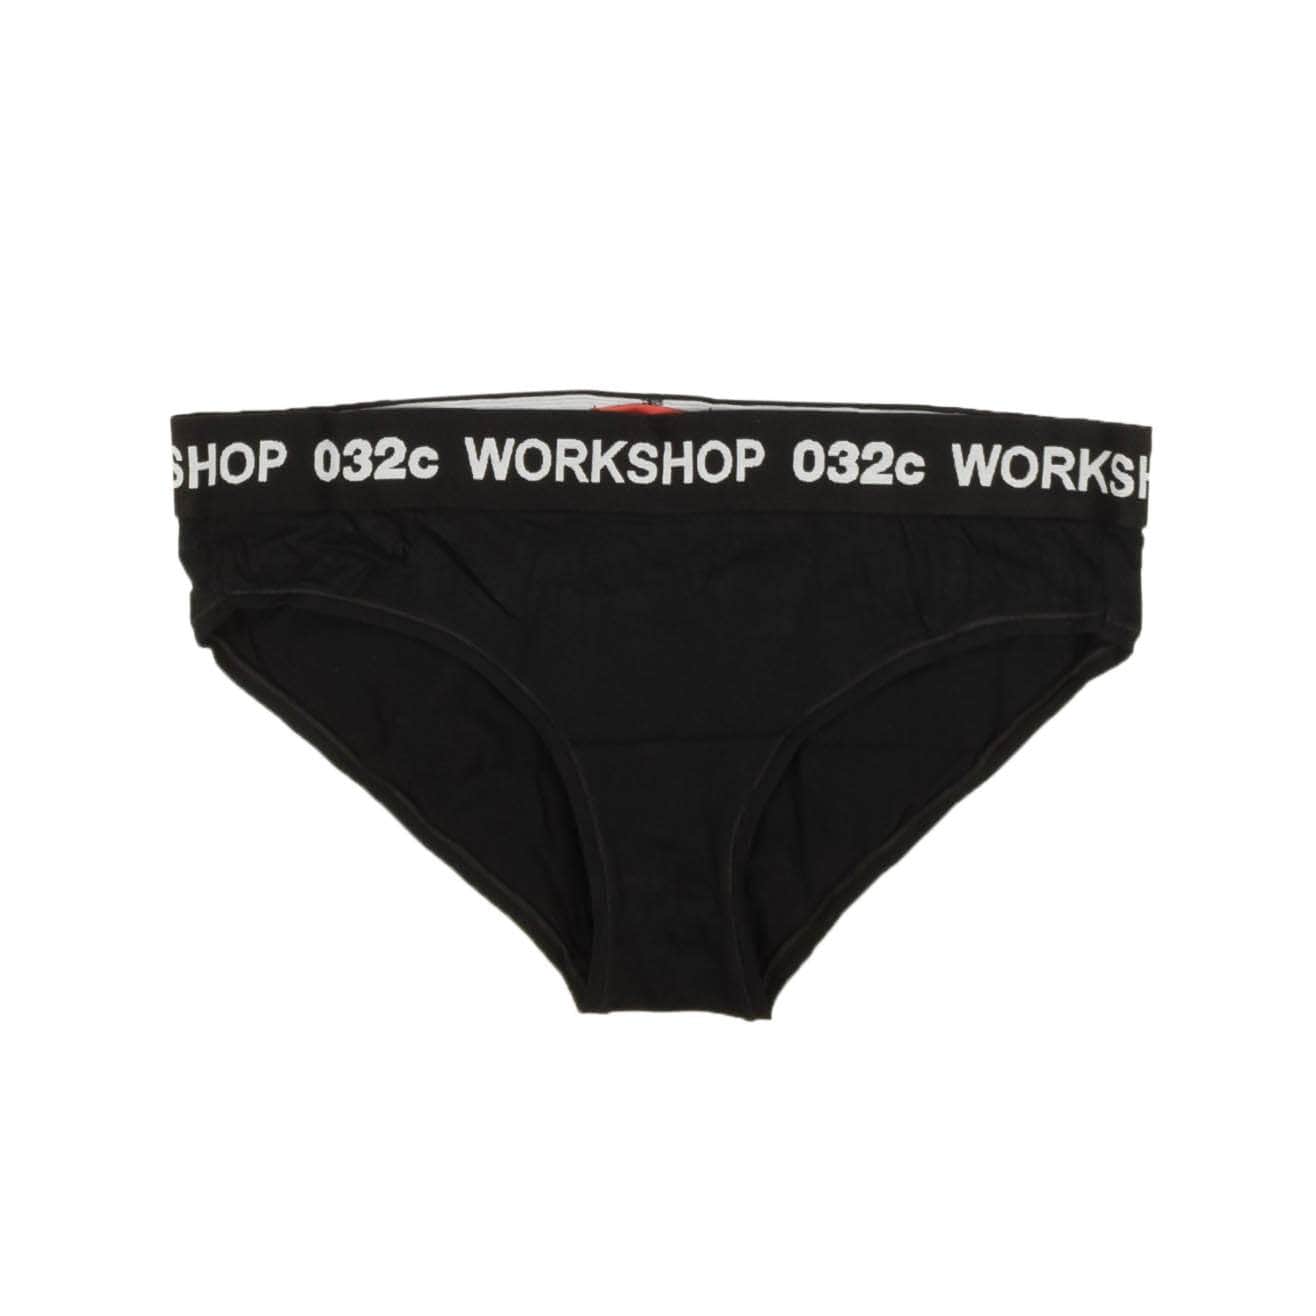 032C 032c, channelenable-all, chicmi, couponcollection, gender-womens, main-clothing, MixedApparel, size-l, size-m, size-s, size-xl, under-250 Black Classic Text Briefs